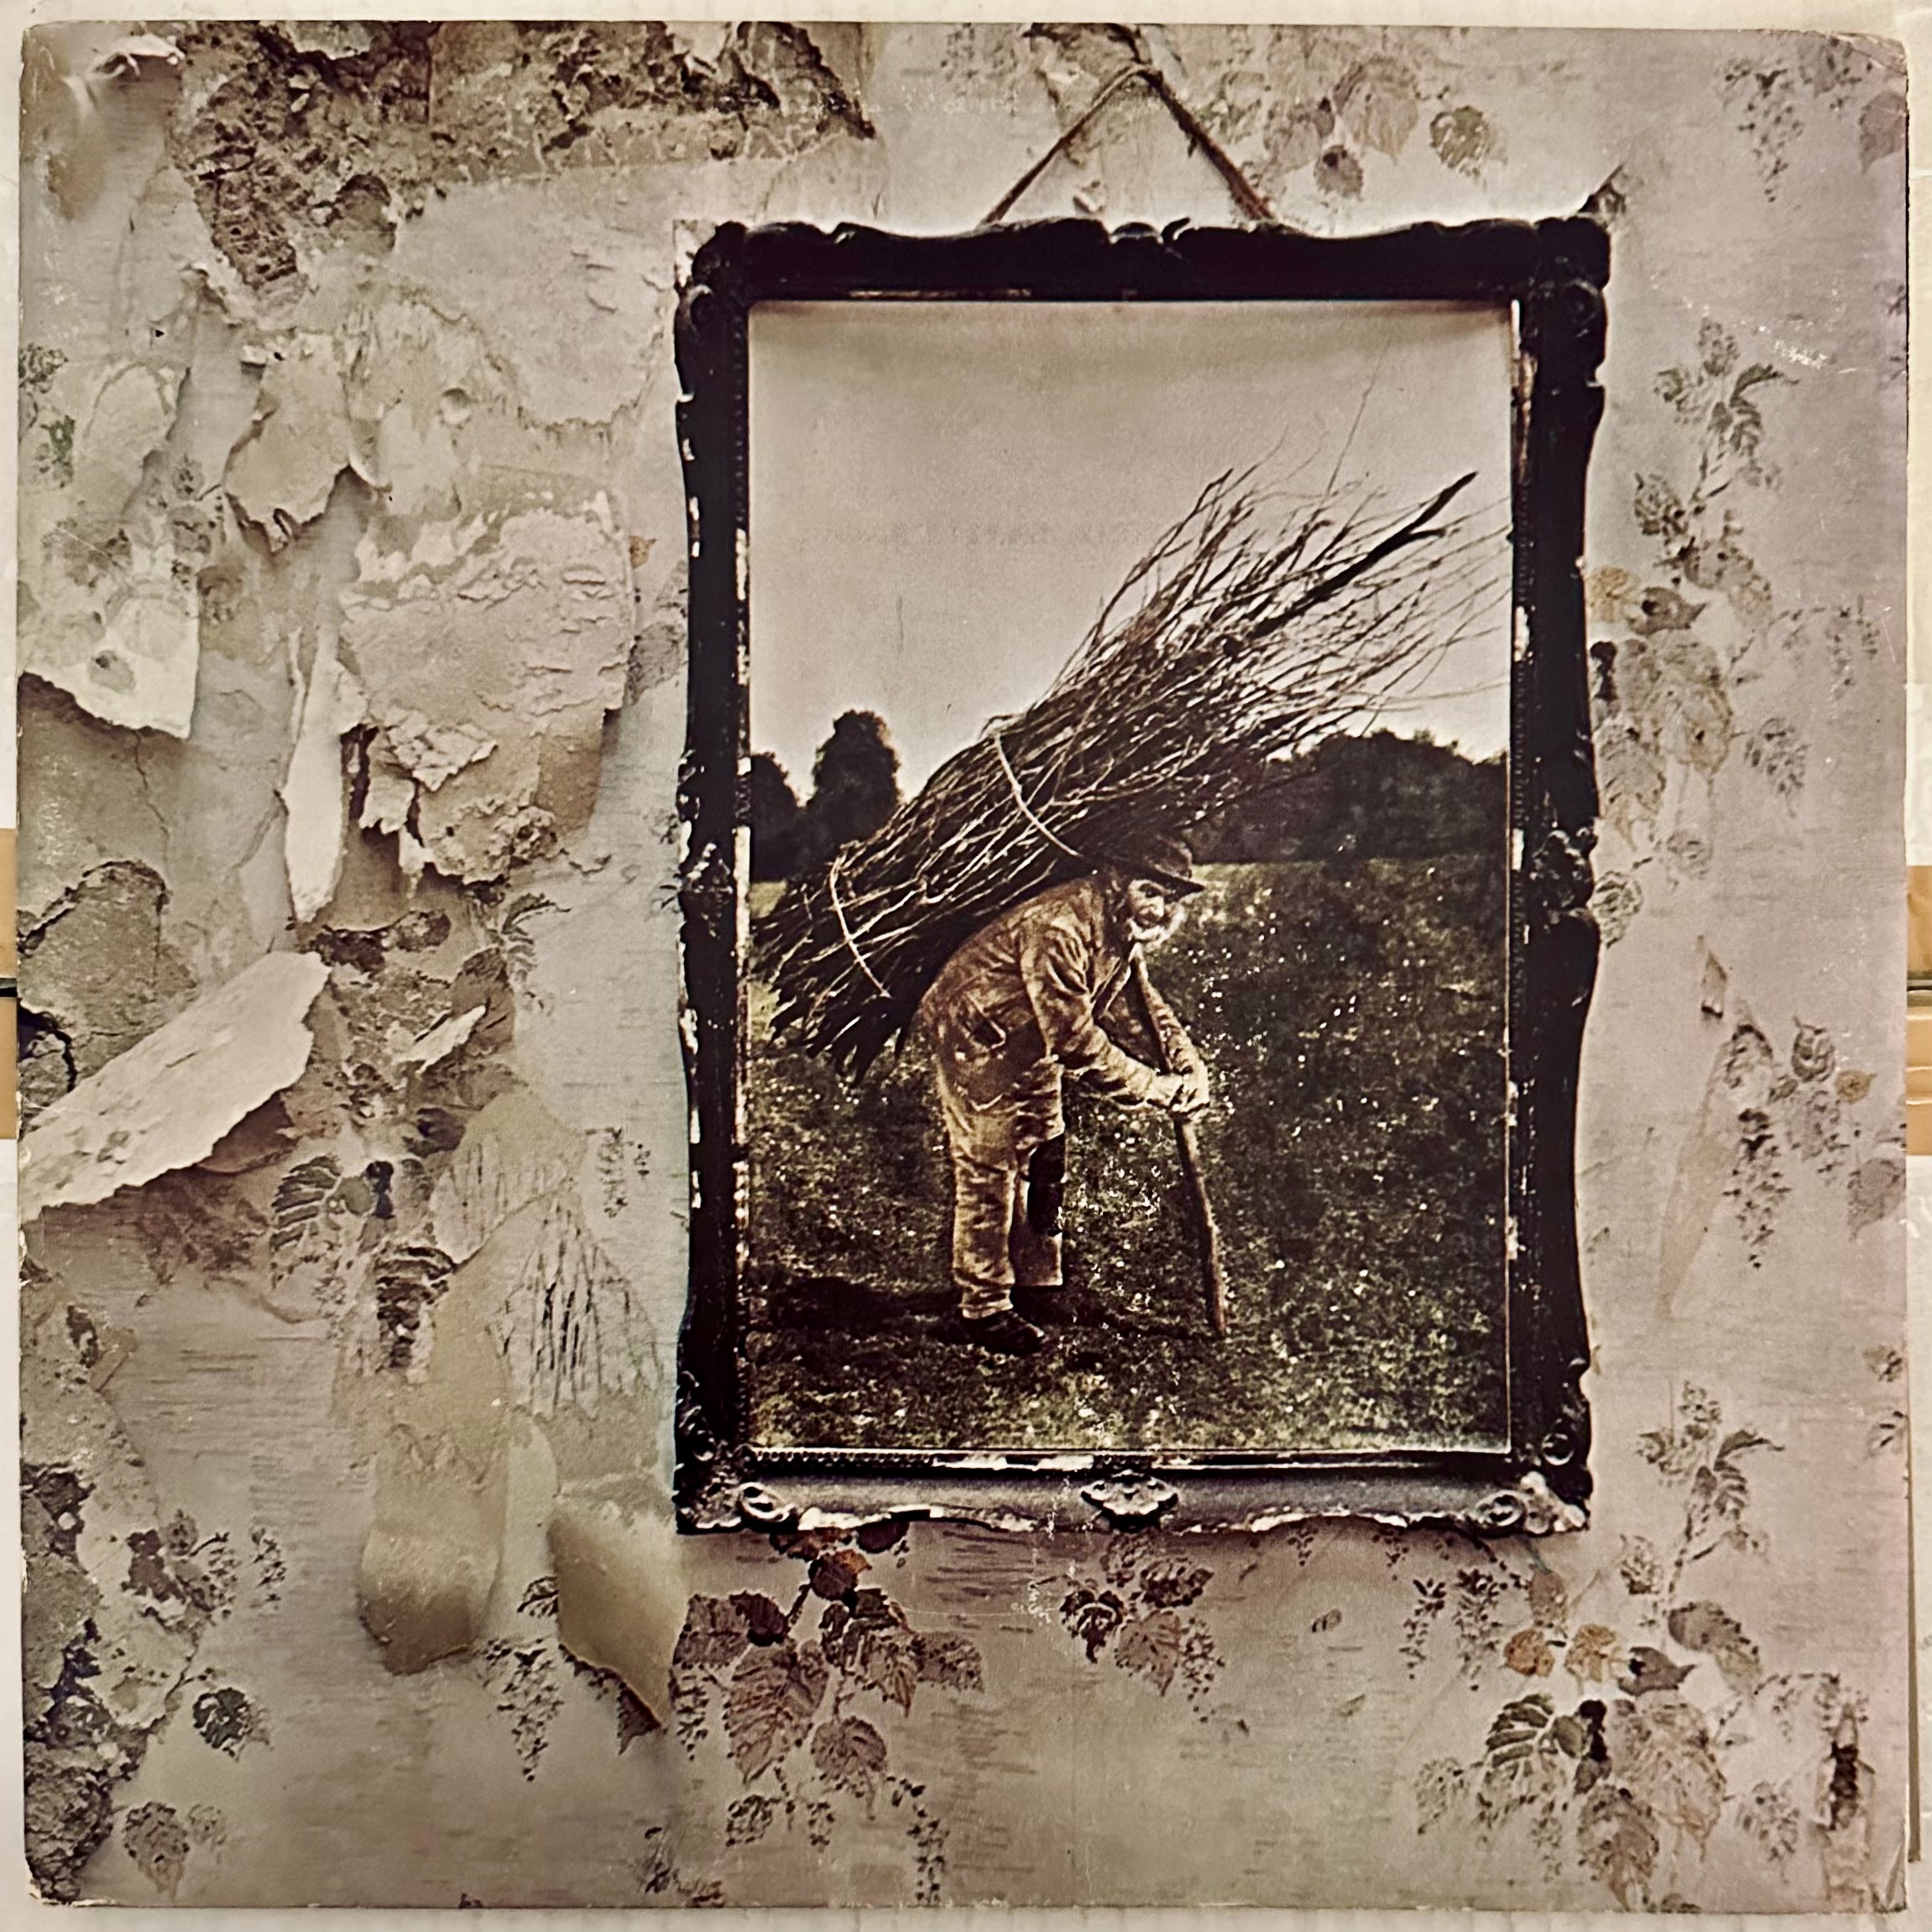 Led Zeppelin's fourth record